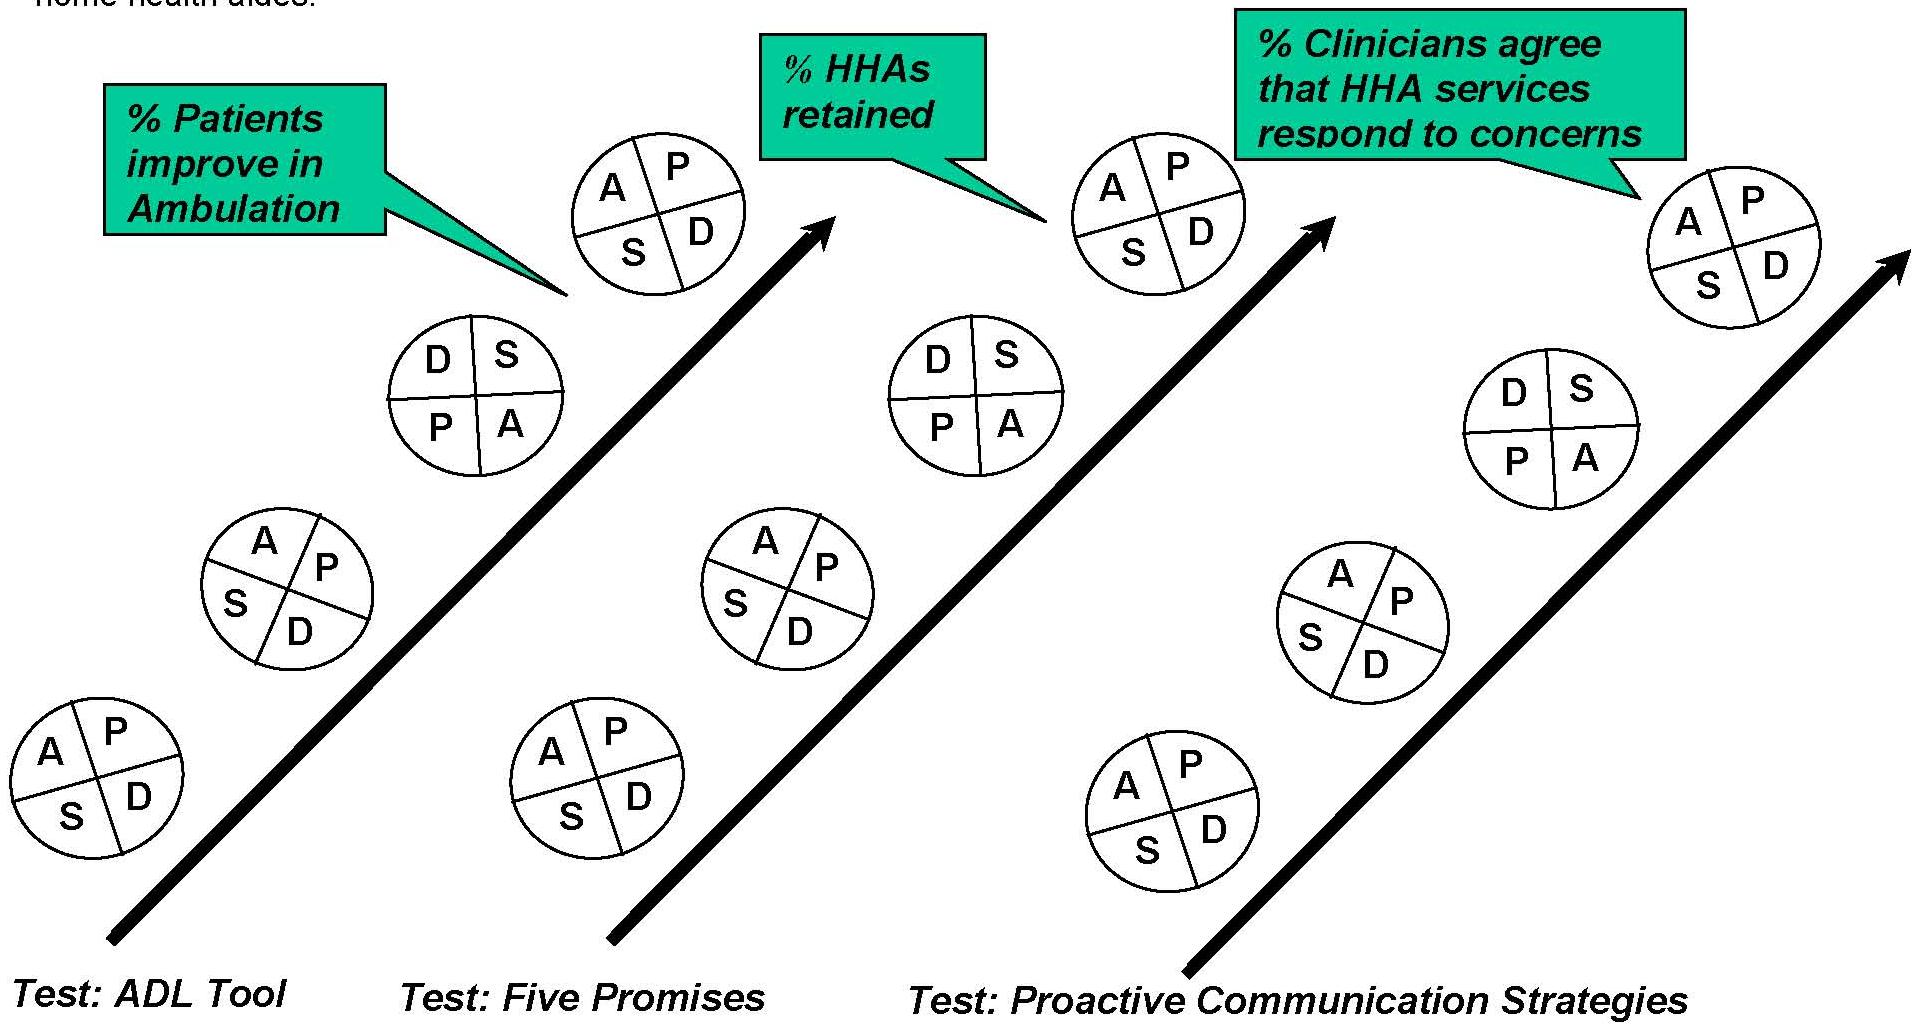 TEST: ADL Tool -- % Patients Improve to Ambulation before third and fourth test. TEST: FIVE PROMISES -- % HHAs retained near beginning of fourth test. TEST: PROACTIVE COMMUNICATION STRATEGIES -- % Clinicians agree that HHA services respond to concerns midw